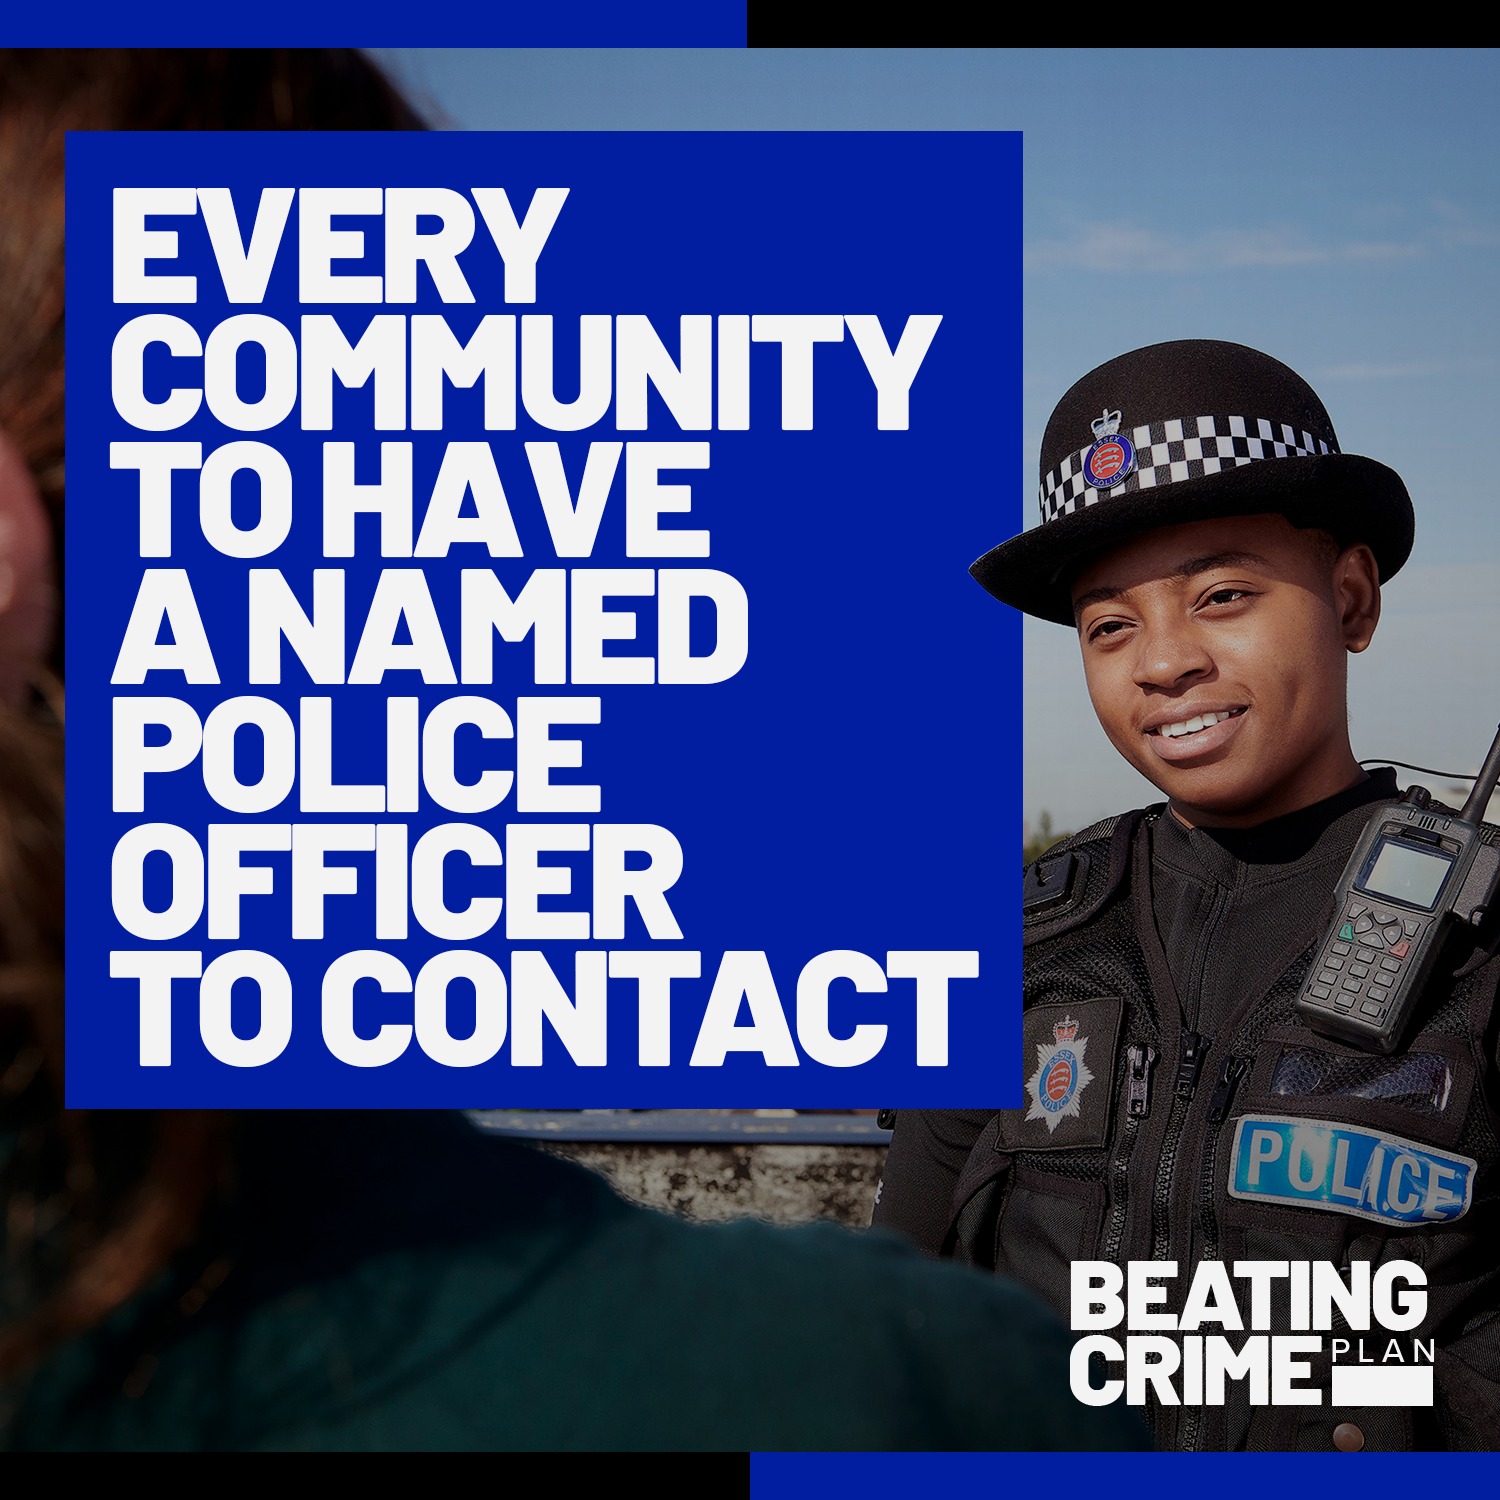 Beating Crime Plan - every community police